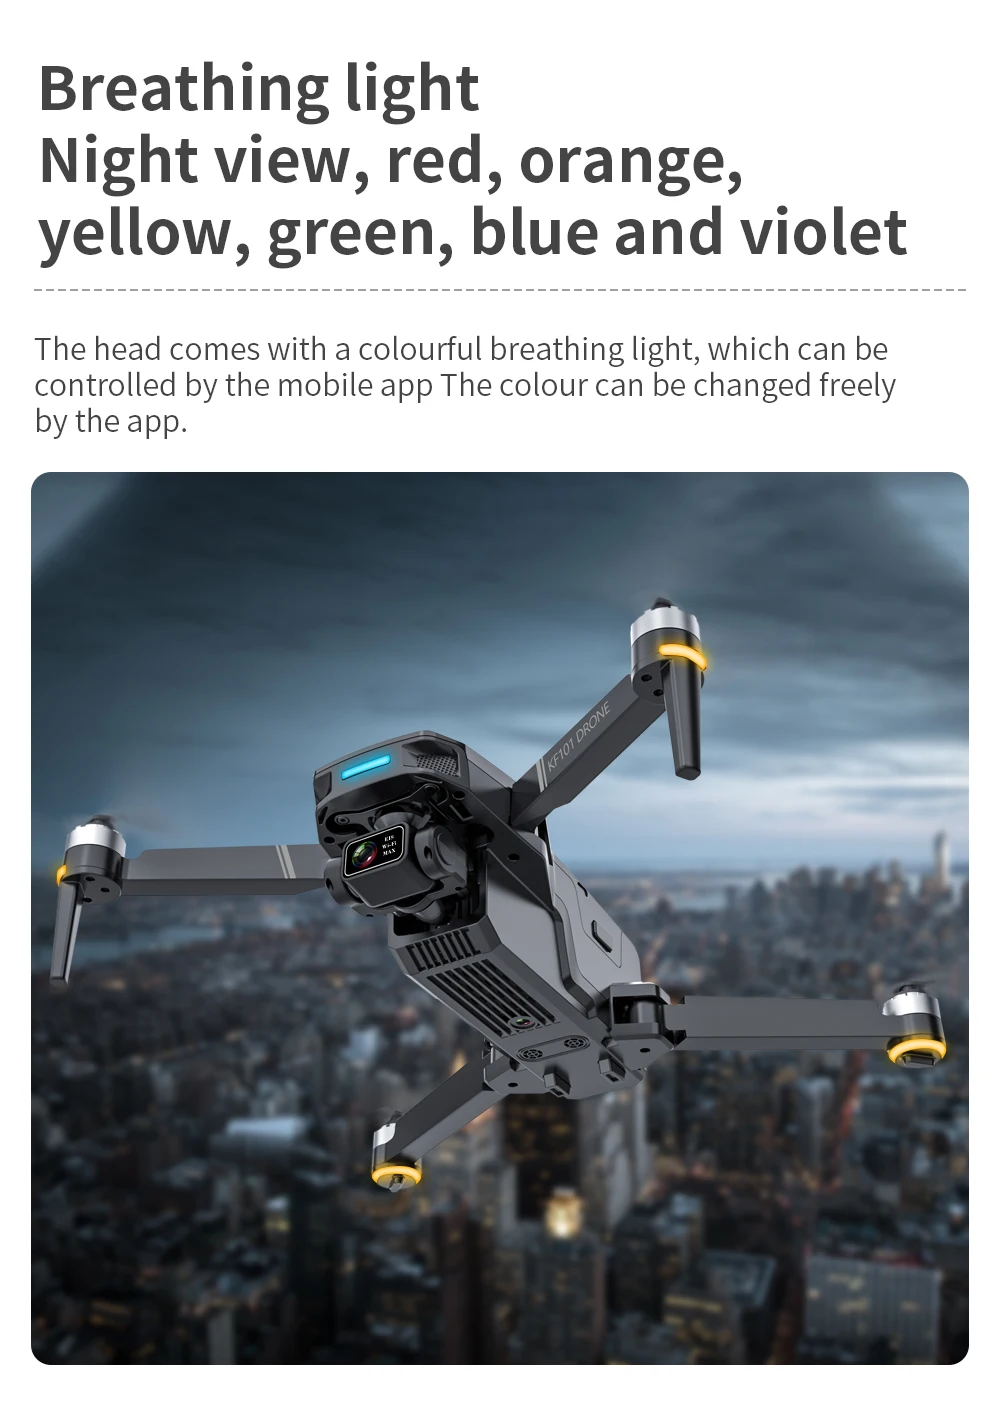 KF101 MAX Drone, the head comes with a colourful breathing light; which can be controlled by the app .